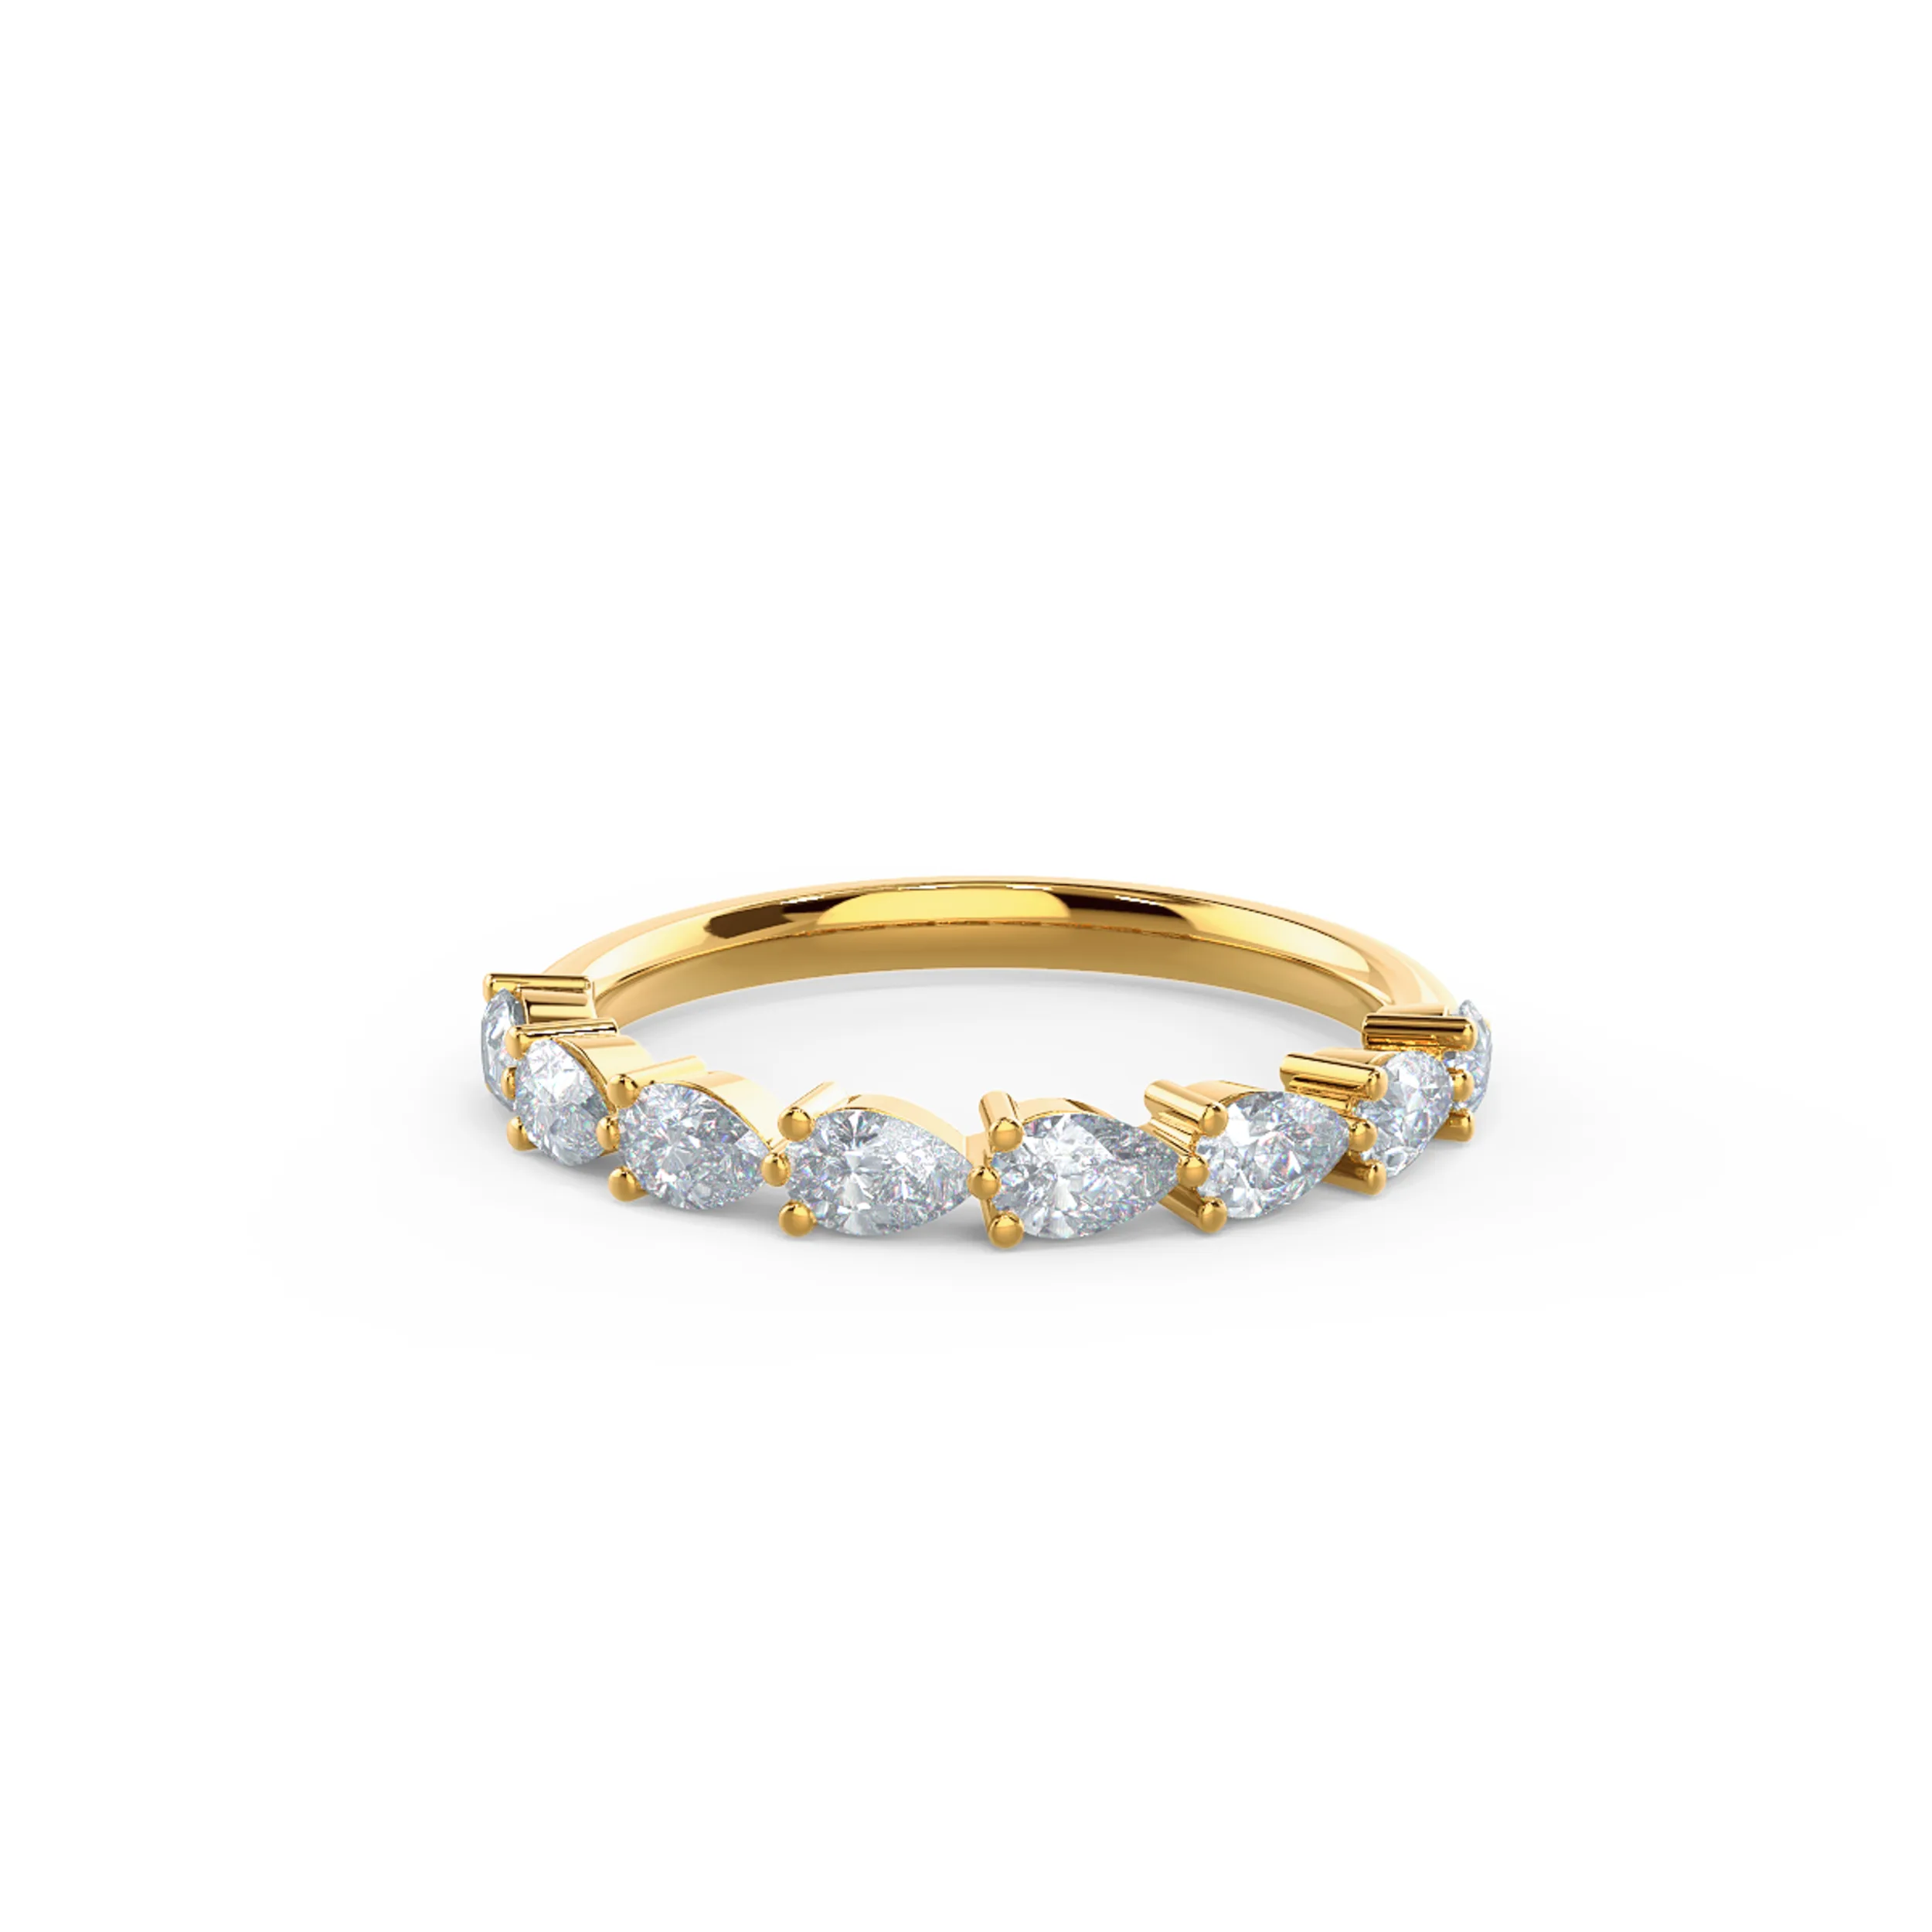 High Quality 1.0 Carat Lab Diamonds set in 18 Karat Yellow Gold Pear East-West Half Band (Main View)